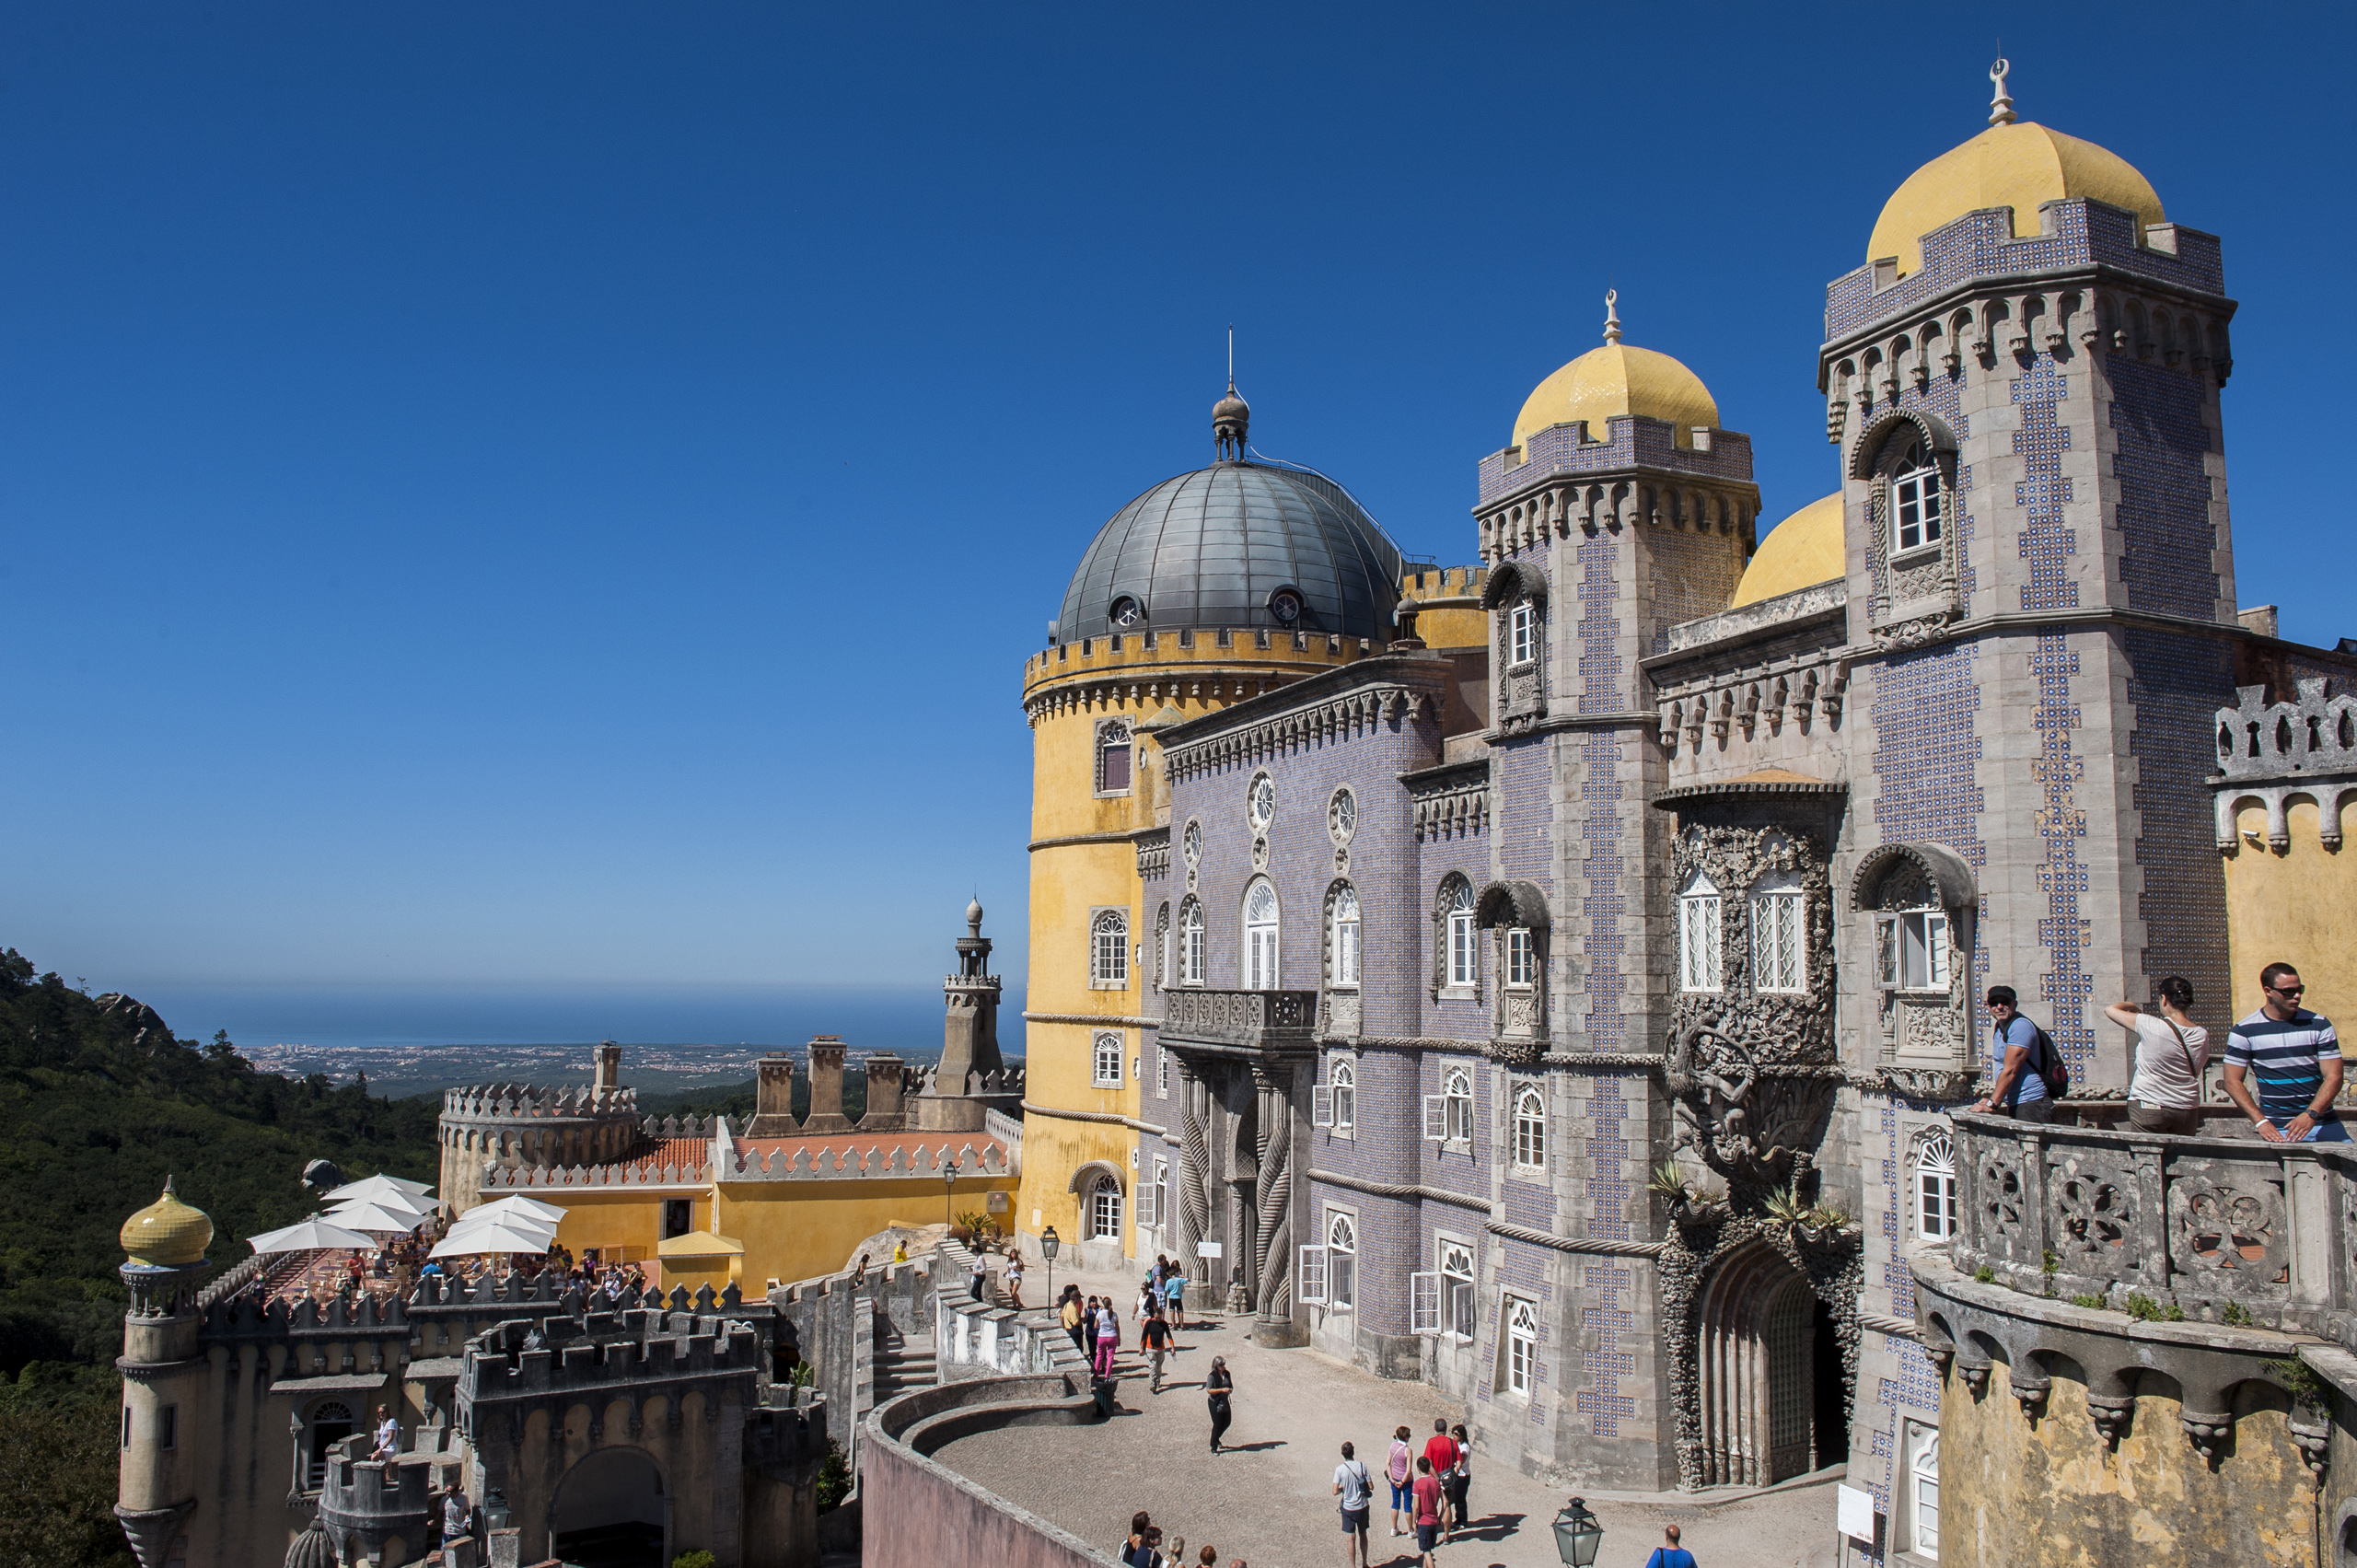 Parques de Sintra company is the world's best in preservation